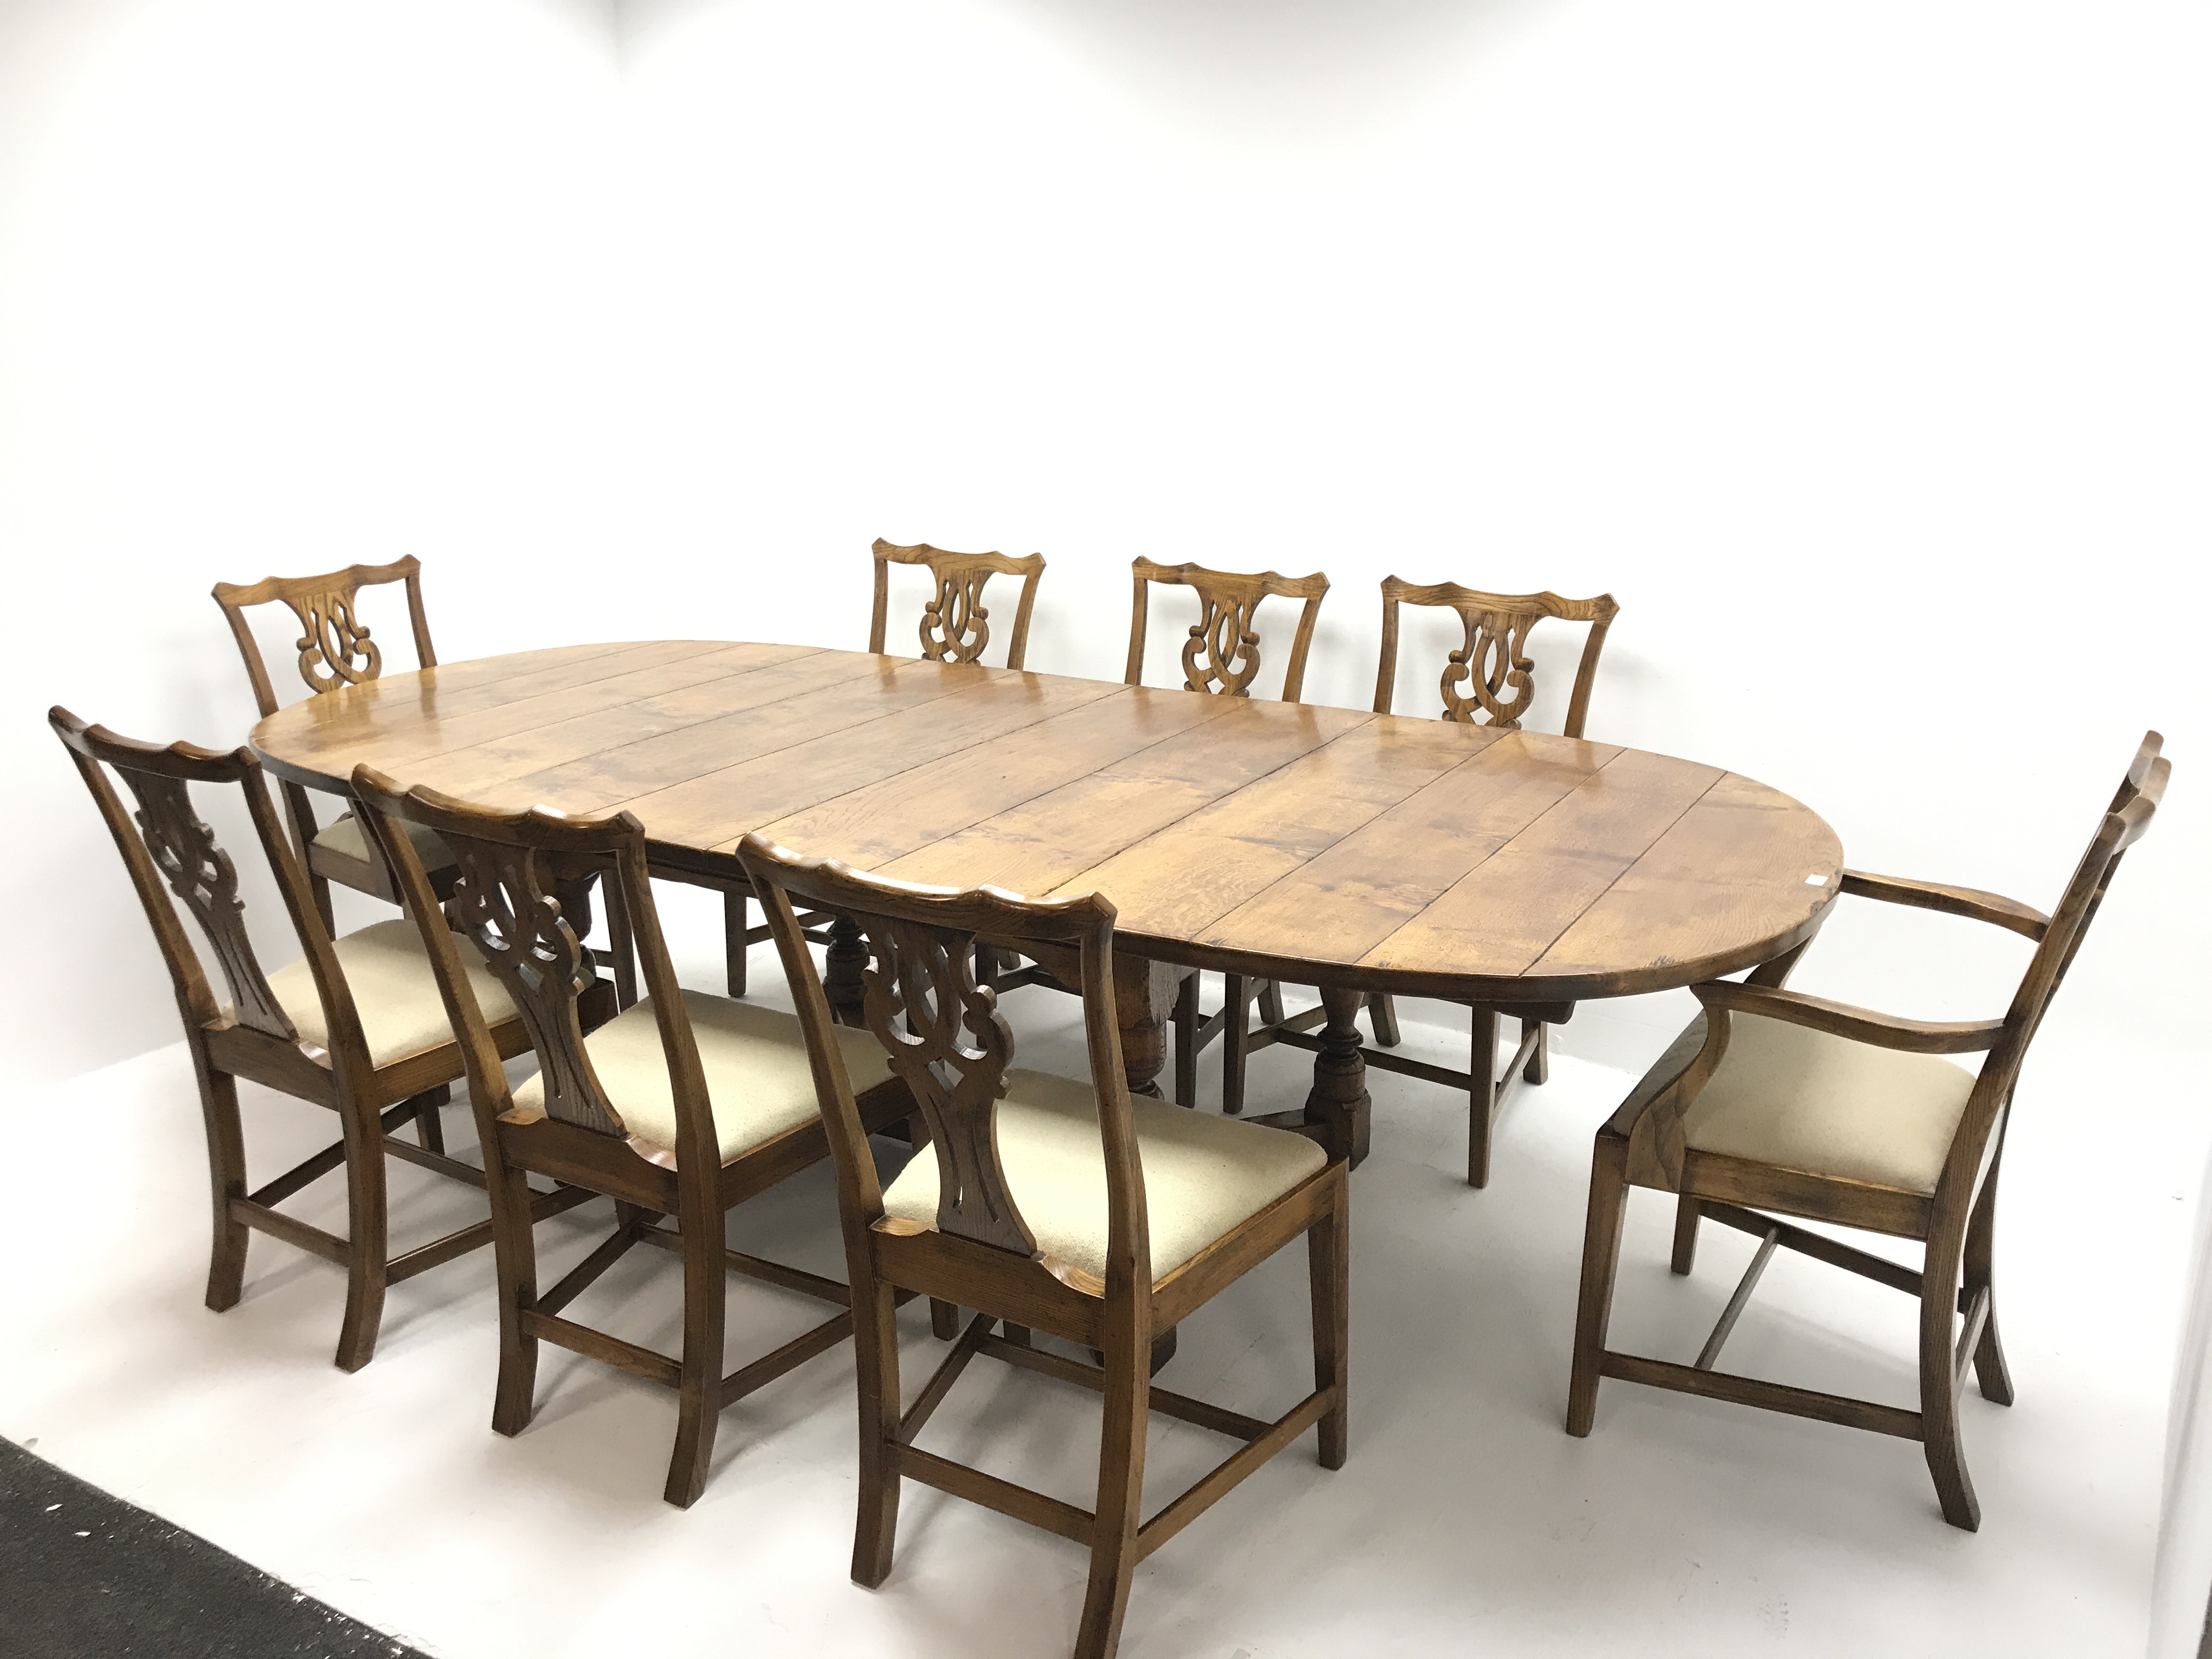 19th century style extending oak dining table, two leaves, baluster supports joined by shaped stretc - Image 15 of 20